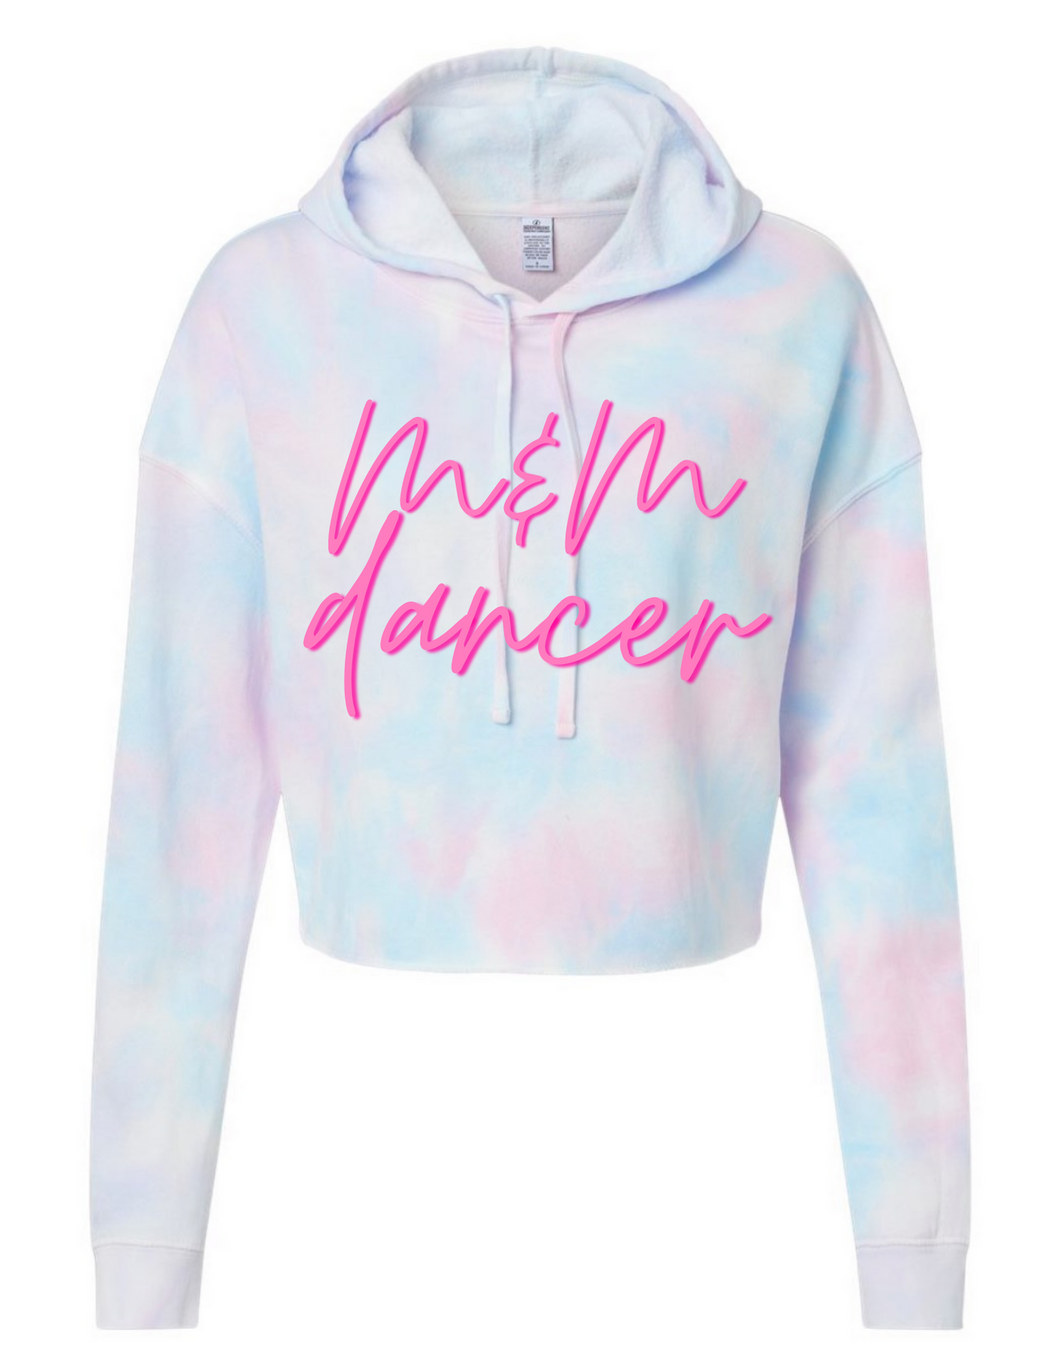 M&M Dancer - Cotton Candy Cropped Hoodie